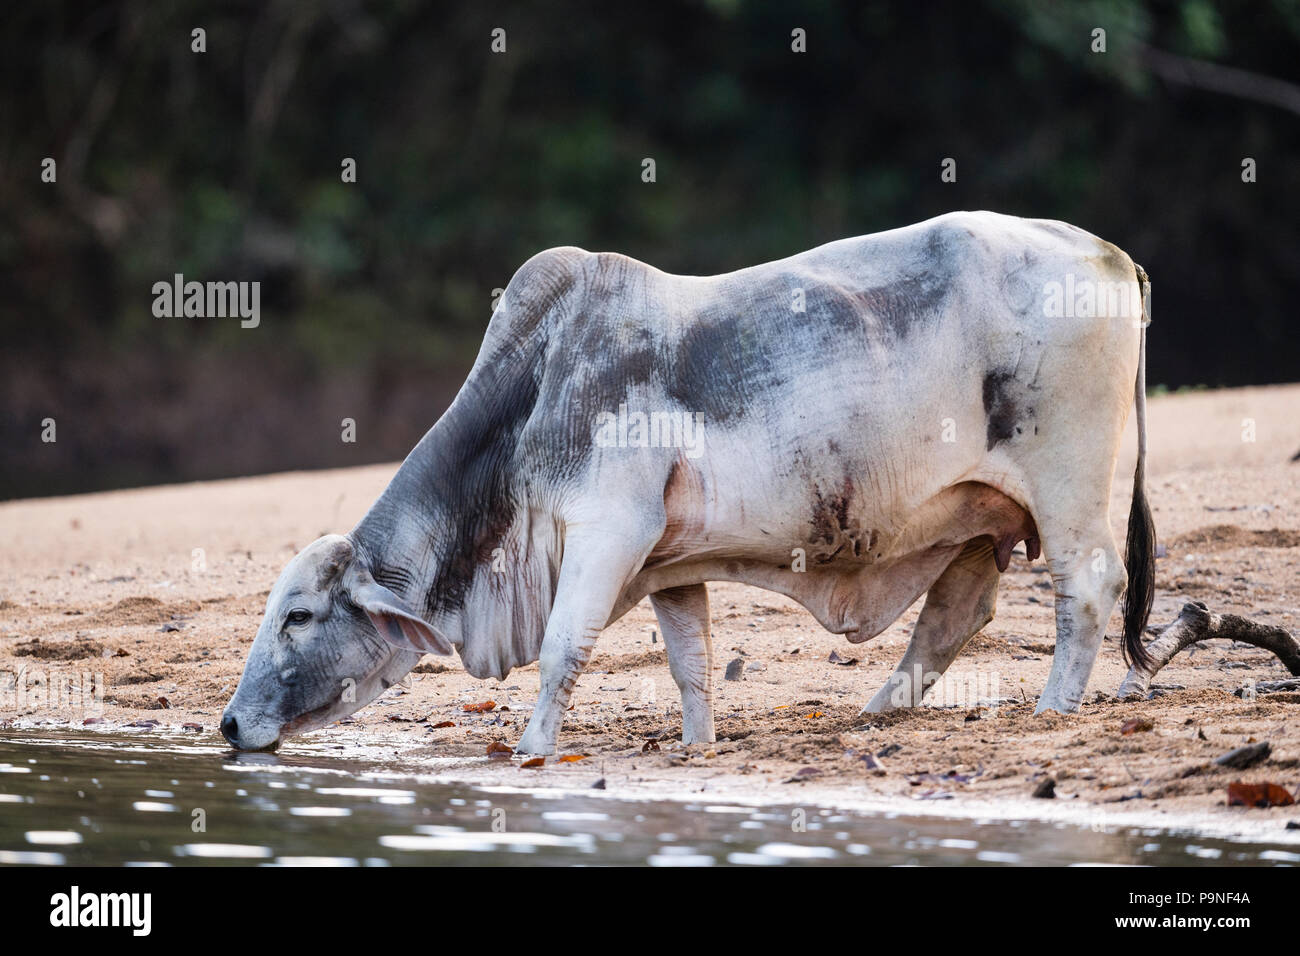 A Brahman cattle drinking from the sandy shore of the Daintree River. Stock Photo